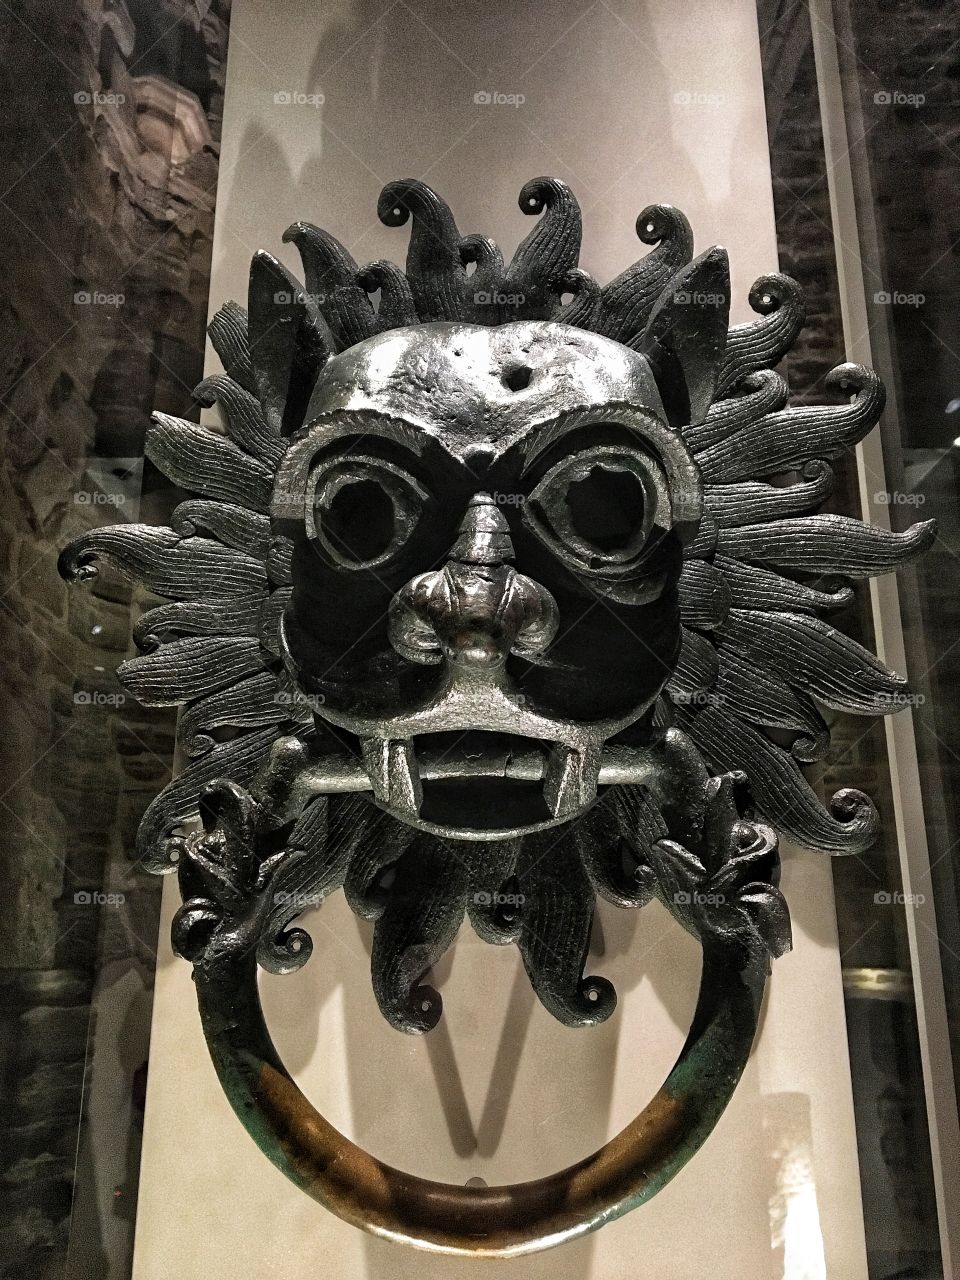 The Sanctury Knocker Durham UK ... This door knocker is the original that used to hang on Durham Cathedral’s North Door ... fugitives In the Middle Ages could use the knocker to summon a watchman to gain 37 days sanctury to choose a trial or exile 🇬🇧